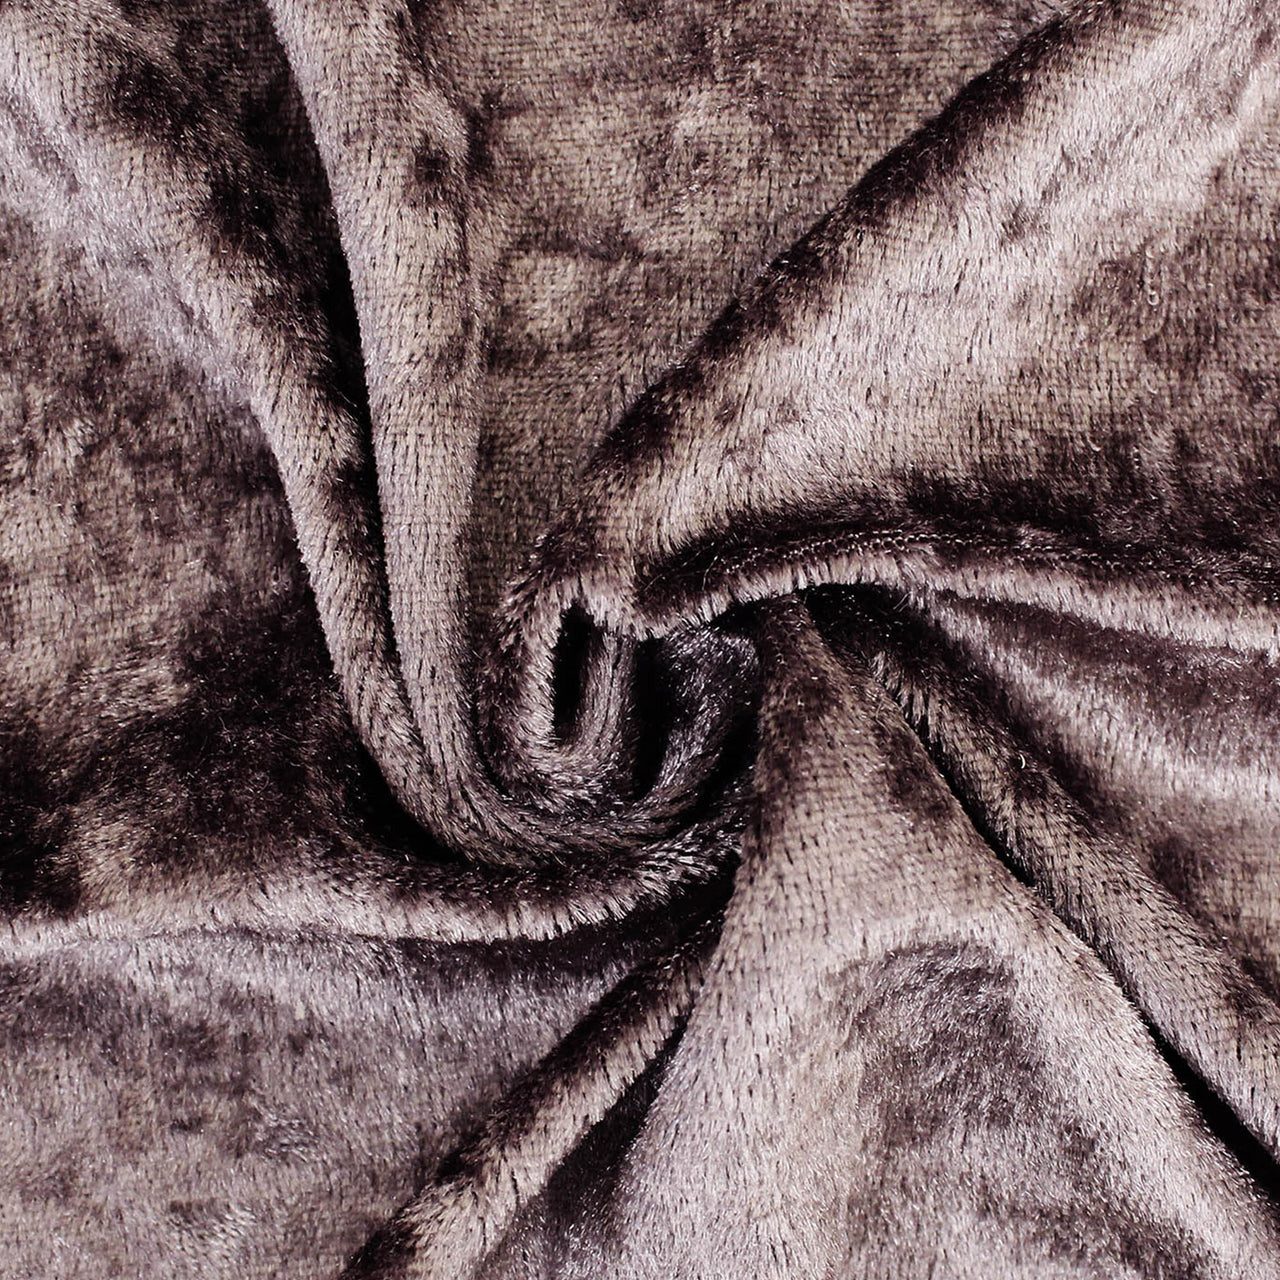 Grey - Crushed Velvet Velour Fabric - Natural One Way Stretch For Costumes & Drapes